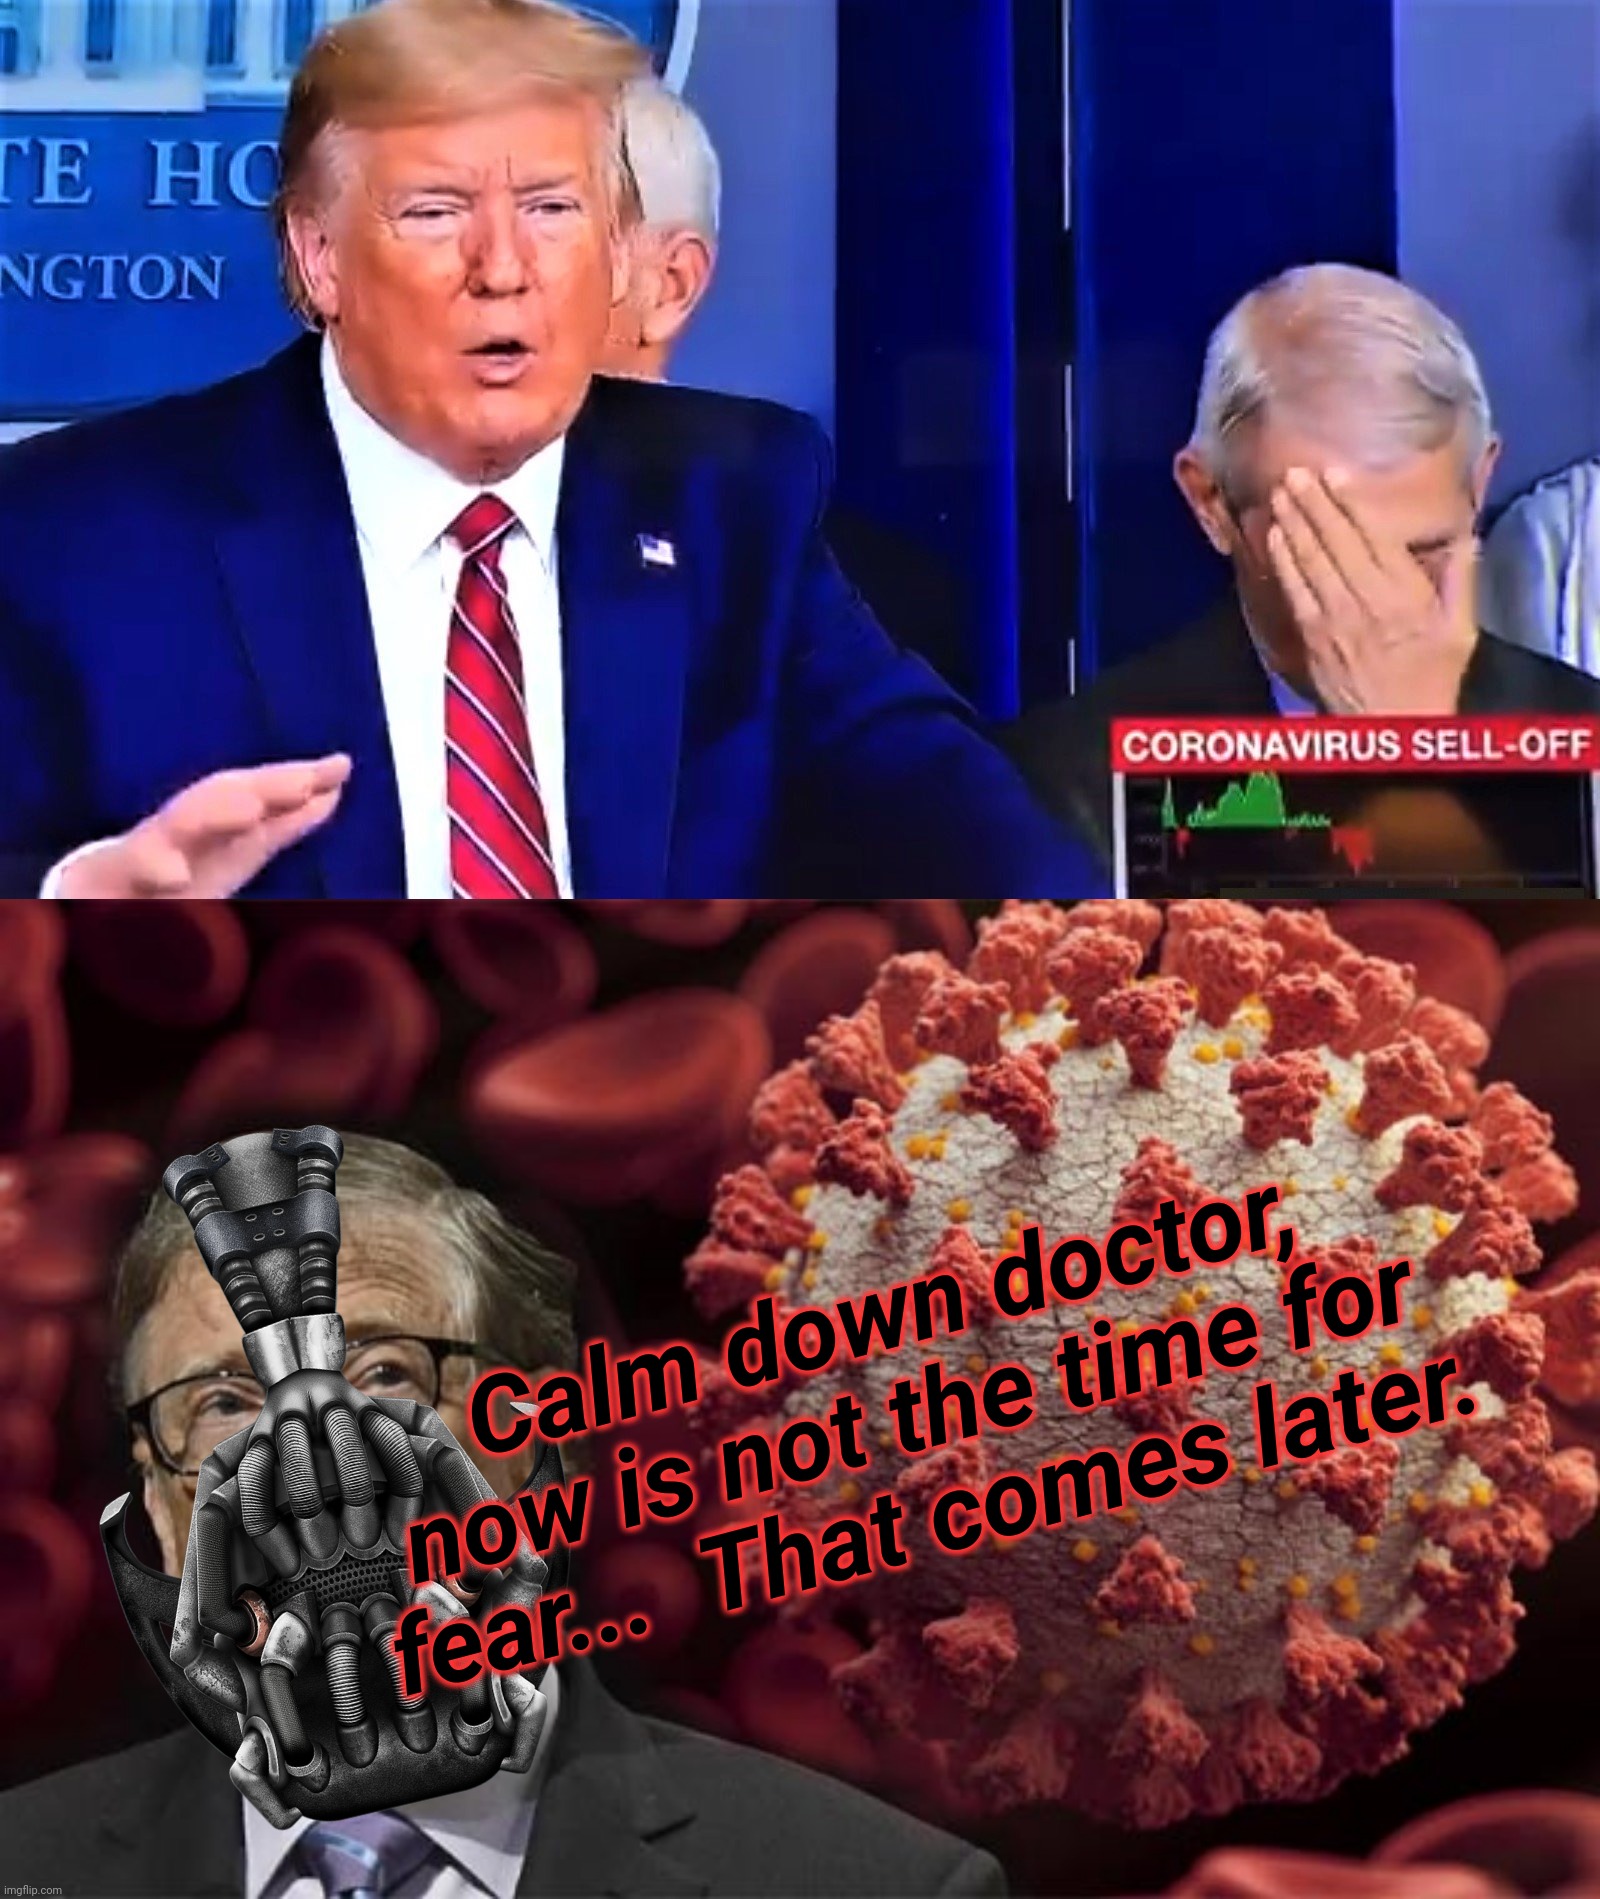 Bill Gates - Bane social distancing | Calm down doctor, now is not the time for fear...  That comes later. | image tagged in anthony fauci,bane social distancing,calm down doctor,trump coronavirus,covid19,memes | made w/ Imgflip meme maker